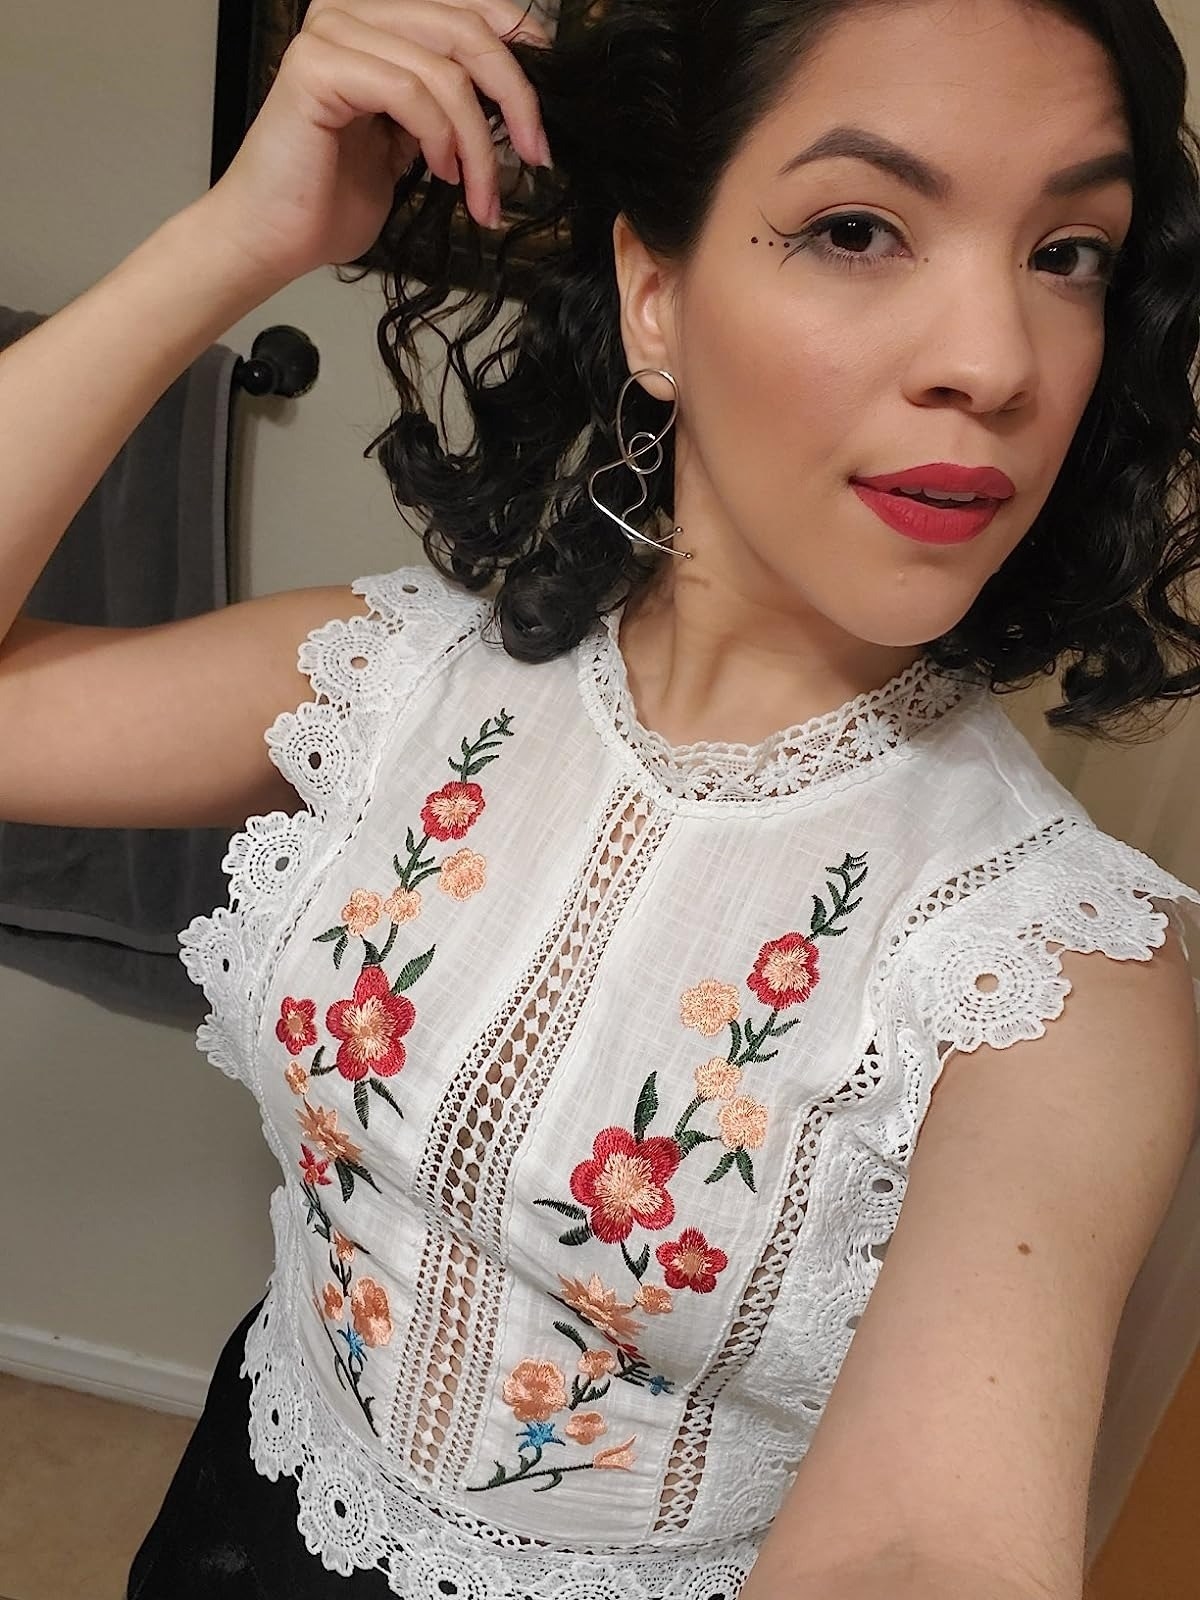 reviewer wearing the top with flowers on it